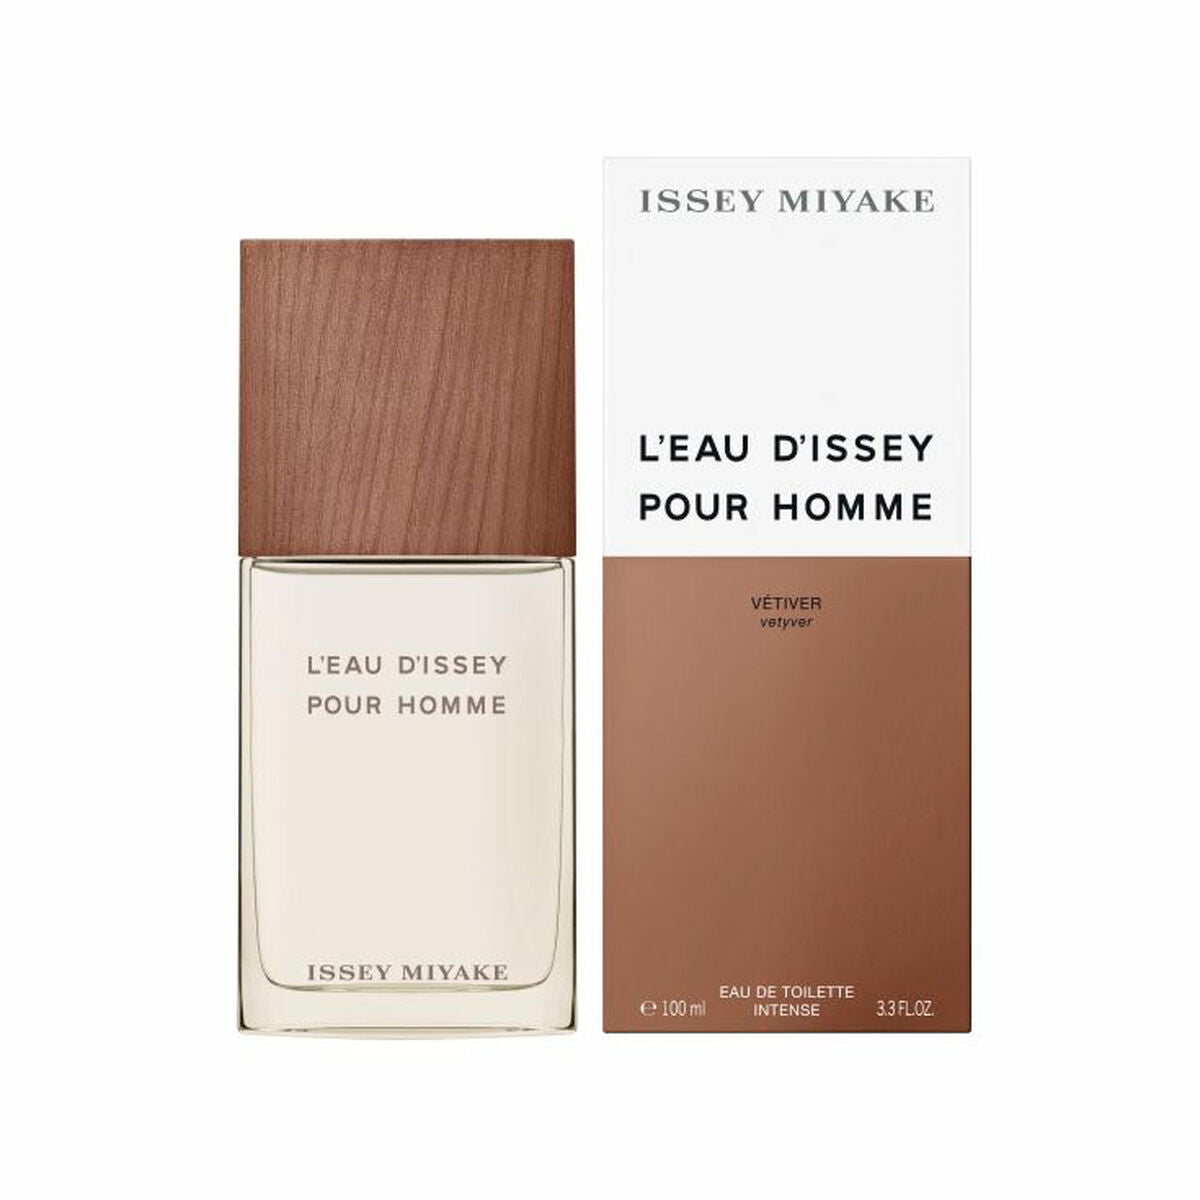 Herenparfum Issey Miyake EDT L'Eau d'Issey pour Homme Vétiver 100 ml